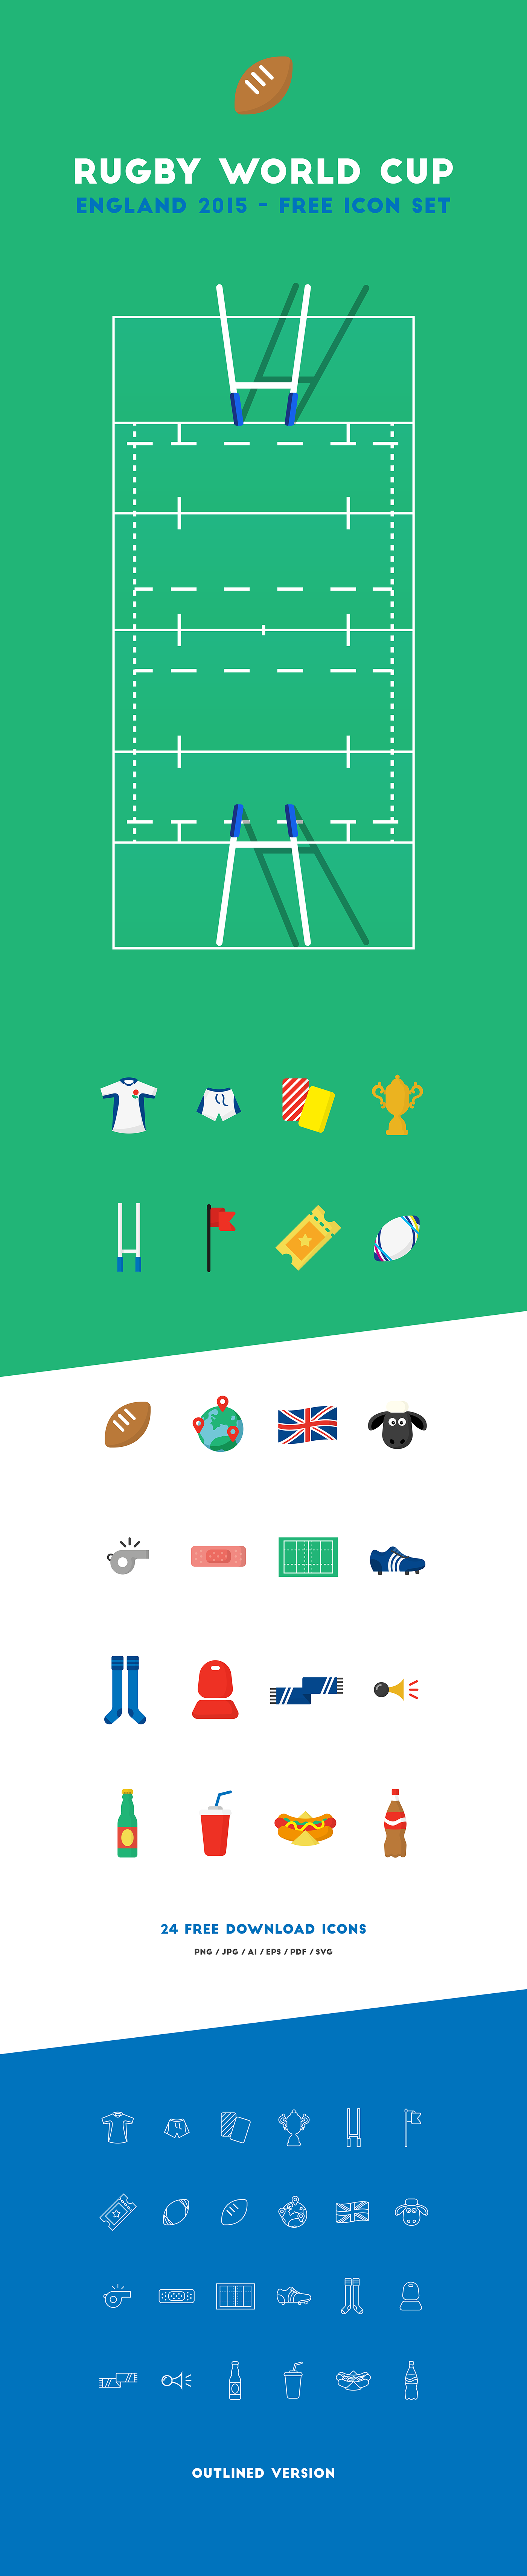 rugbyworldcup Rugby england Icon free download set kit match trophy ball ticket world beer hotdog